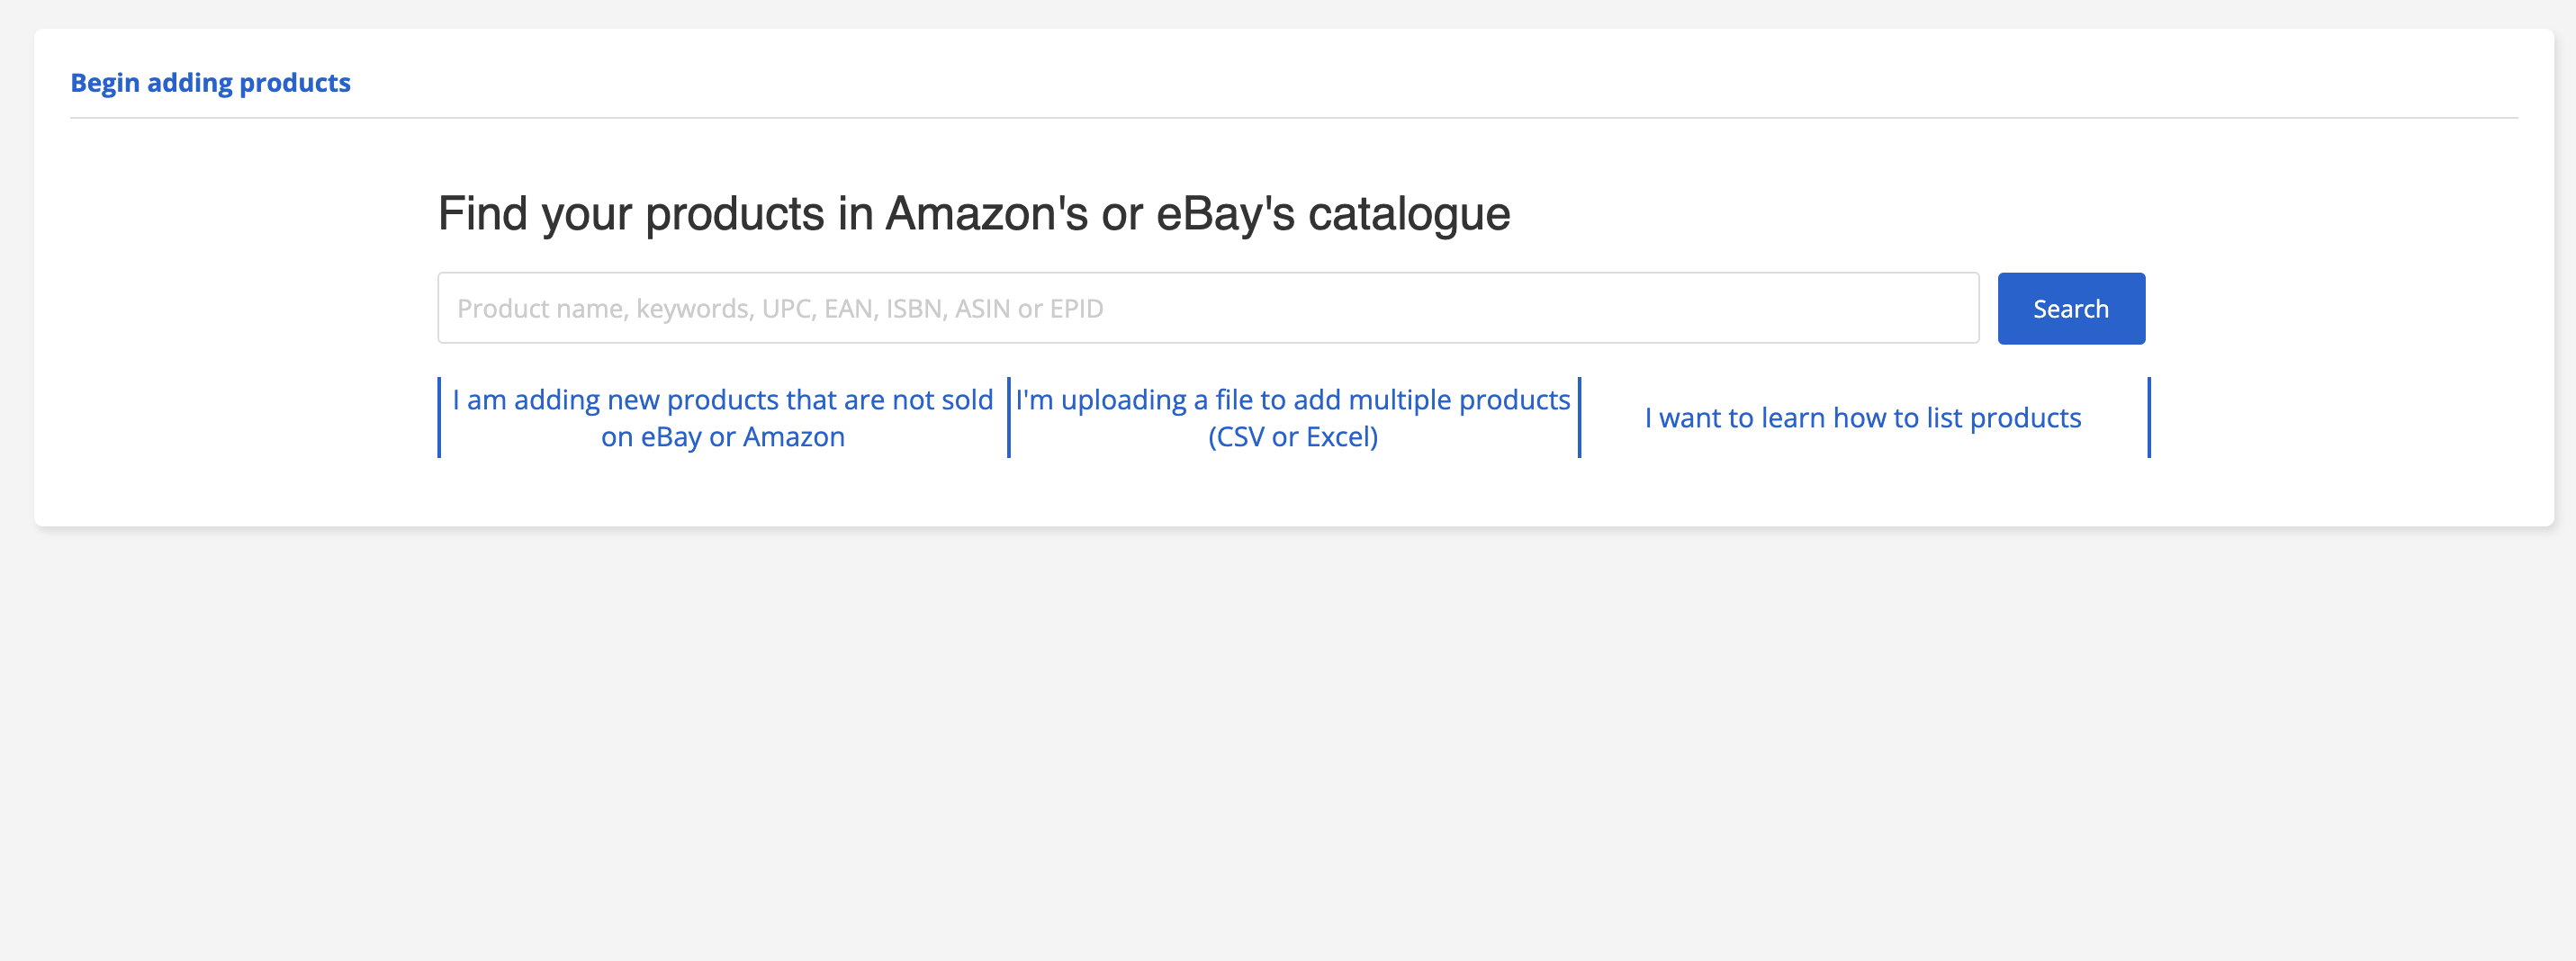 search on eBay's or Amazon's catalogue